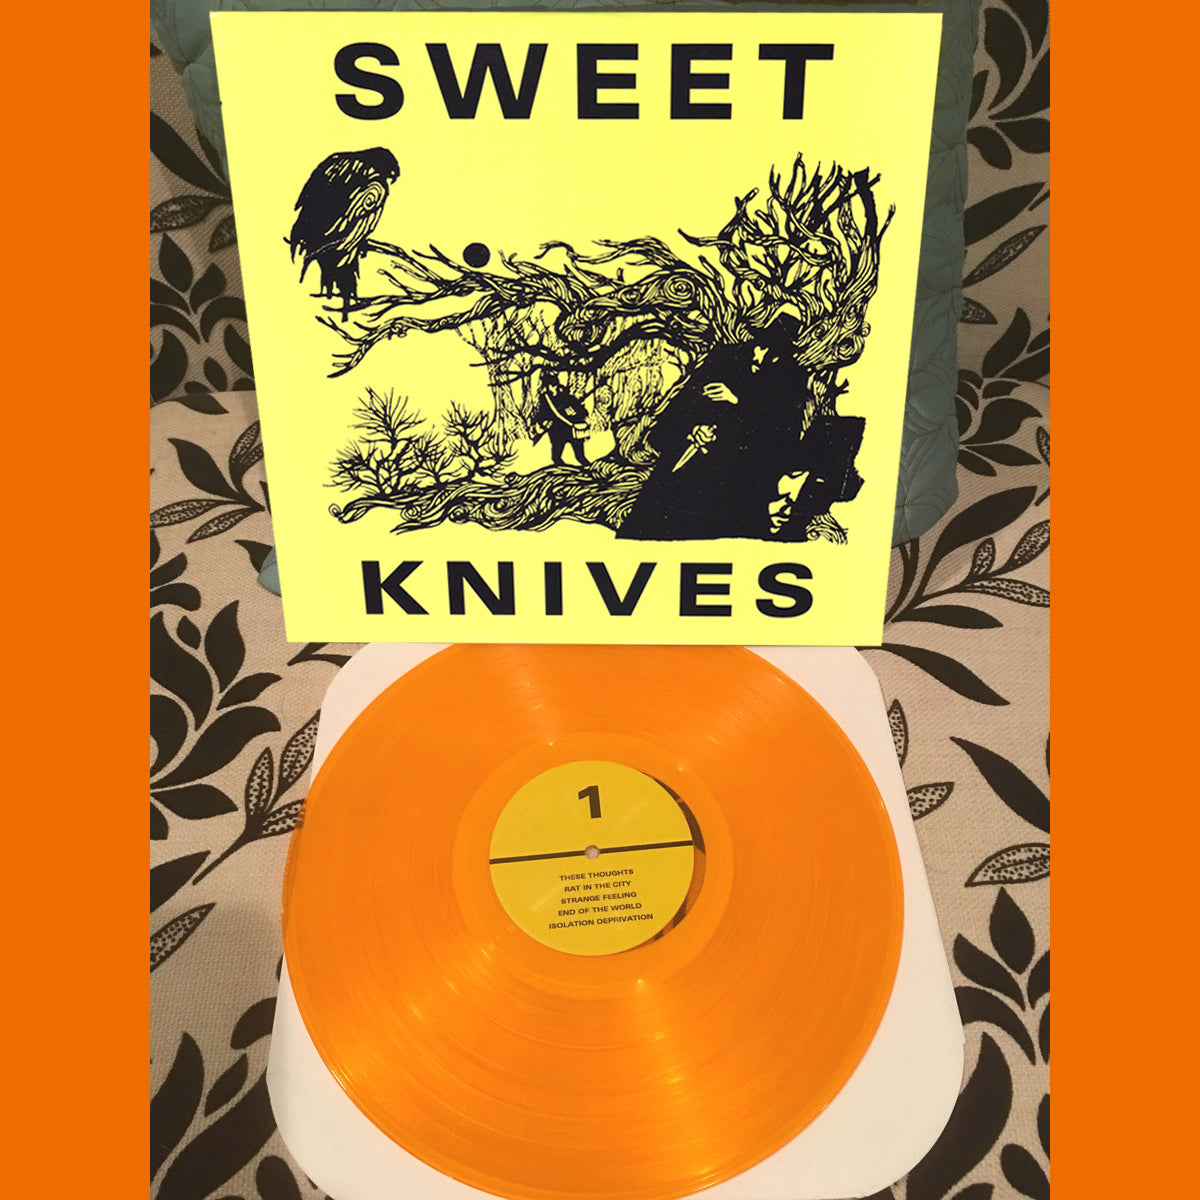 Sweet Knives- S/T LP ~EX LOST SOUNDS / RARE GOLD WAX!